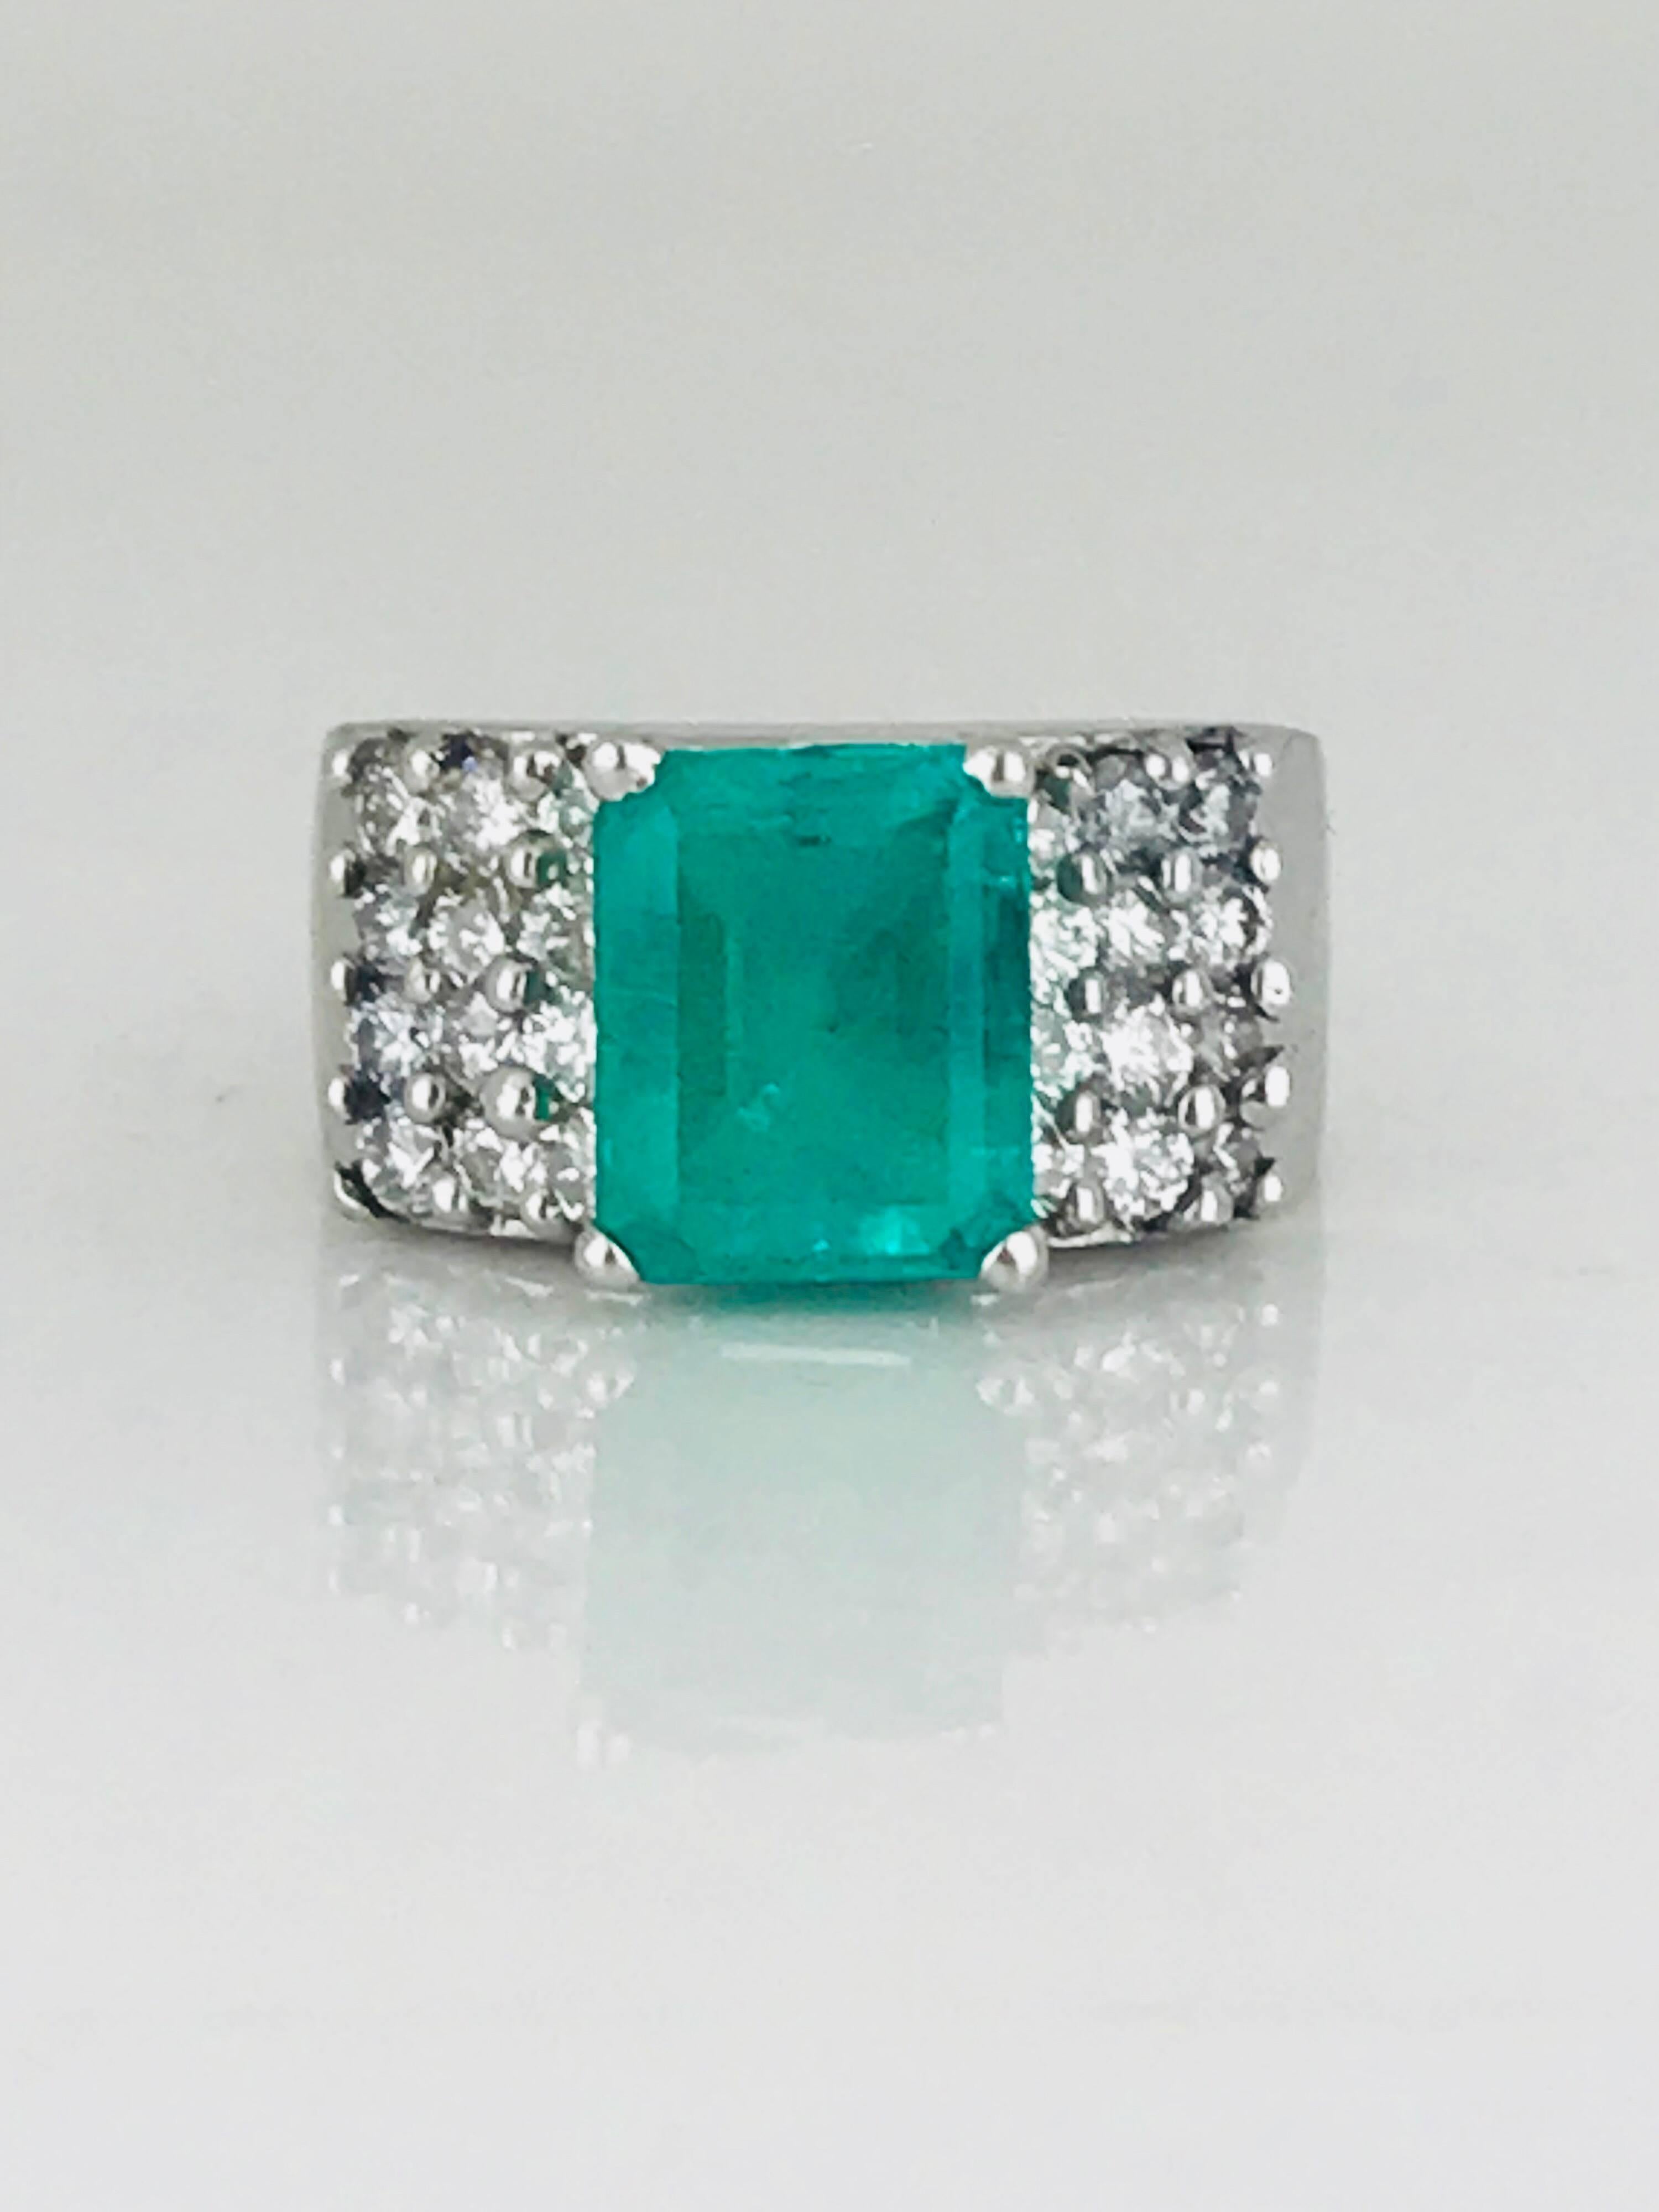 Contemporary, high polished, wide band, 18 karat white gold ring features a large prong-set emerald-cut Colombian emerald solitaire, accented with (24) shared-prong round brilliant diamonds.

Colombian emerald measures 10.24 mm x 8.32 mm and weighs